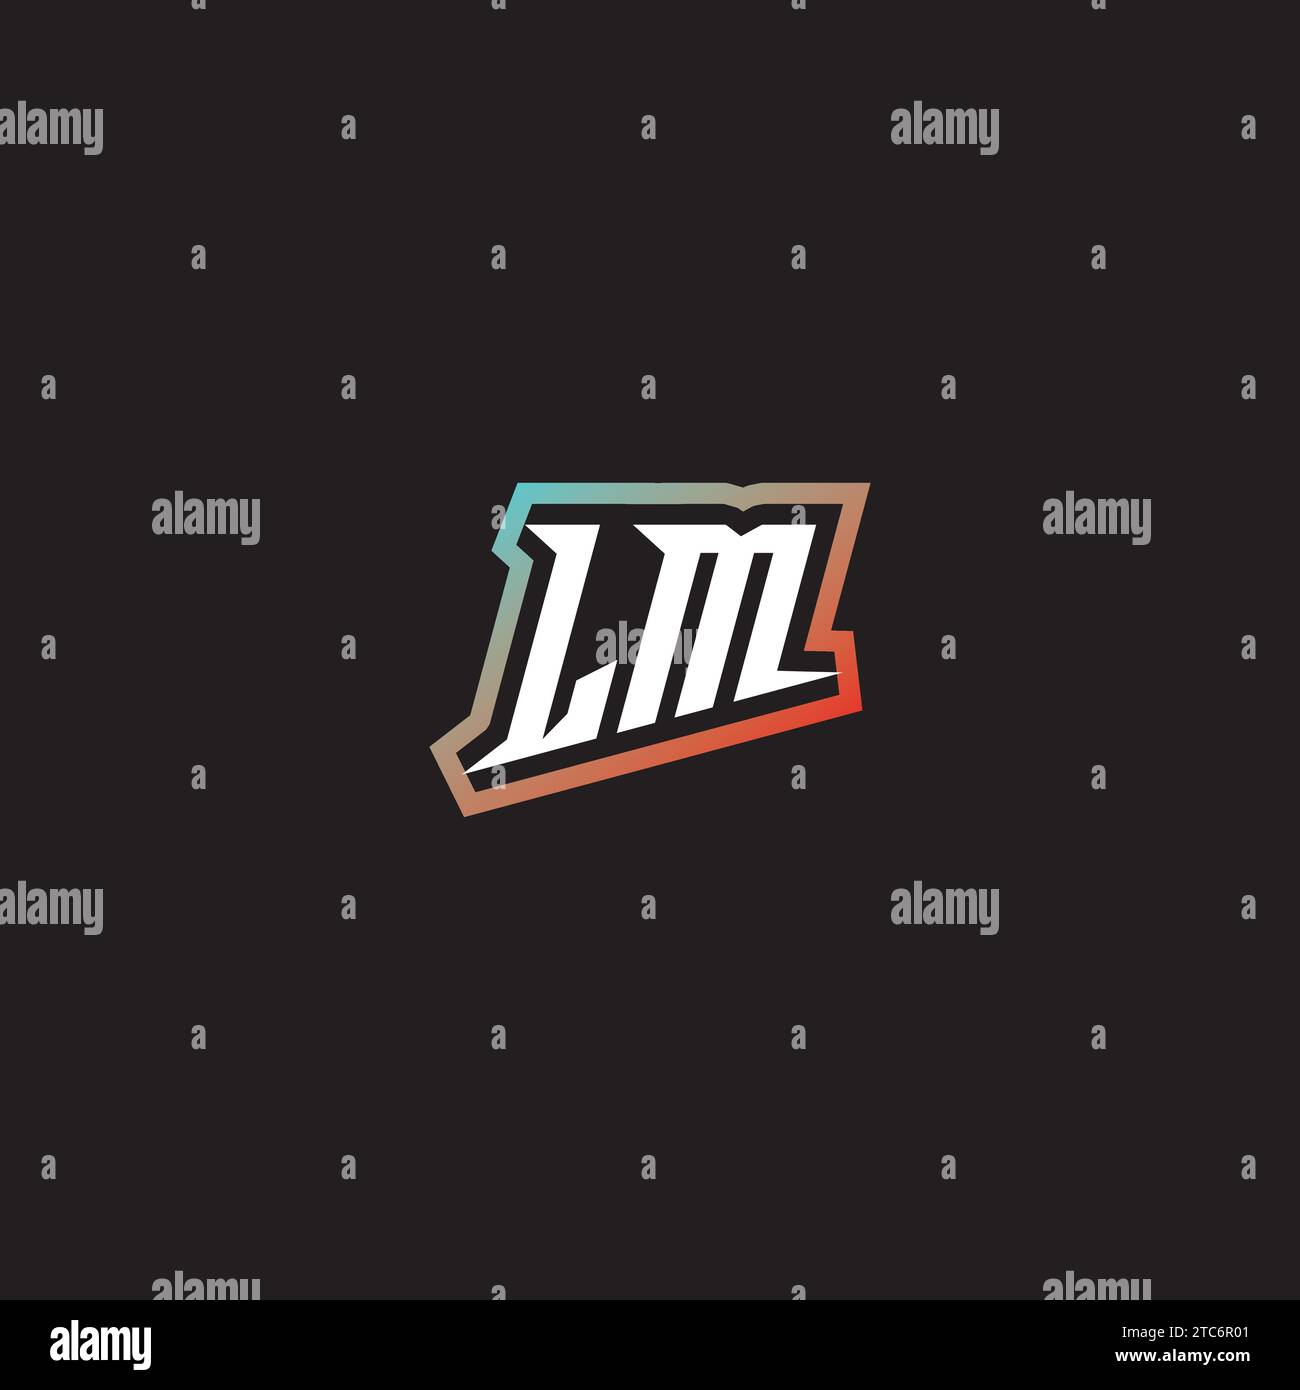 LM letter combination cool logo esport initial and cool color gradattion ideas Stock Vector